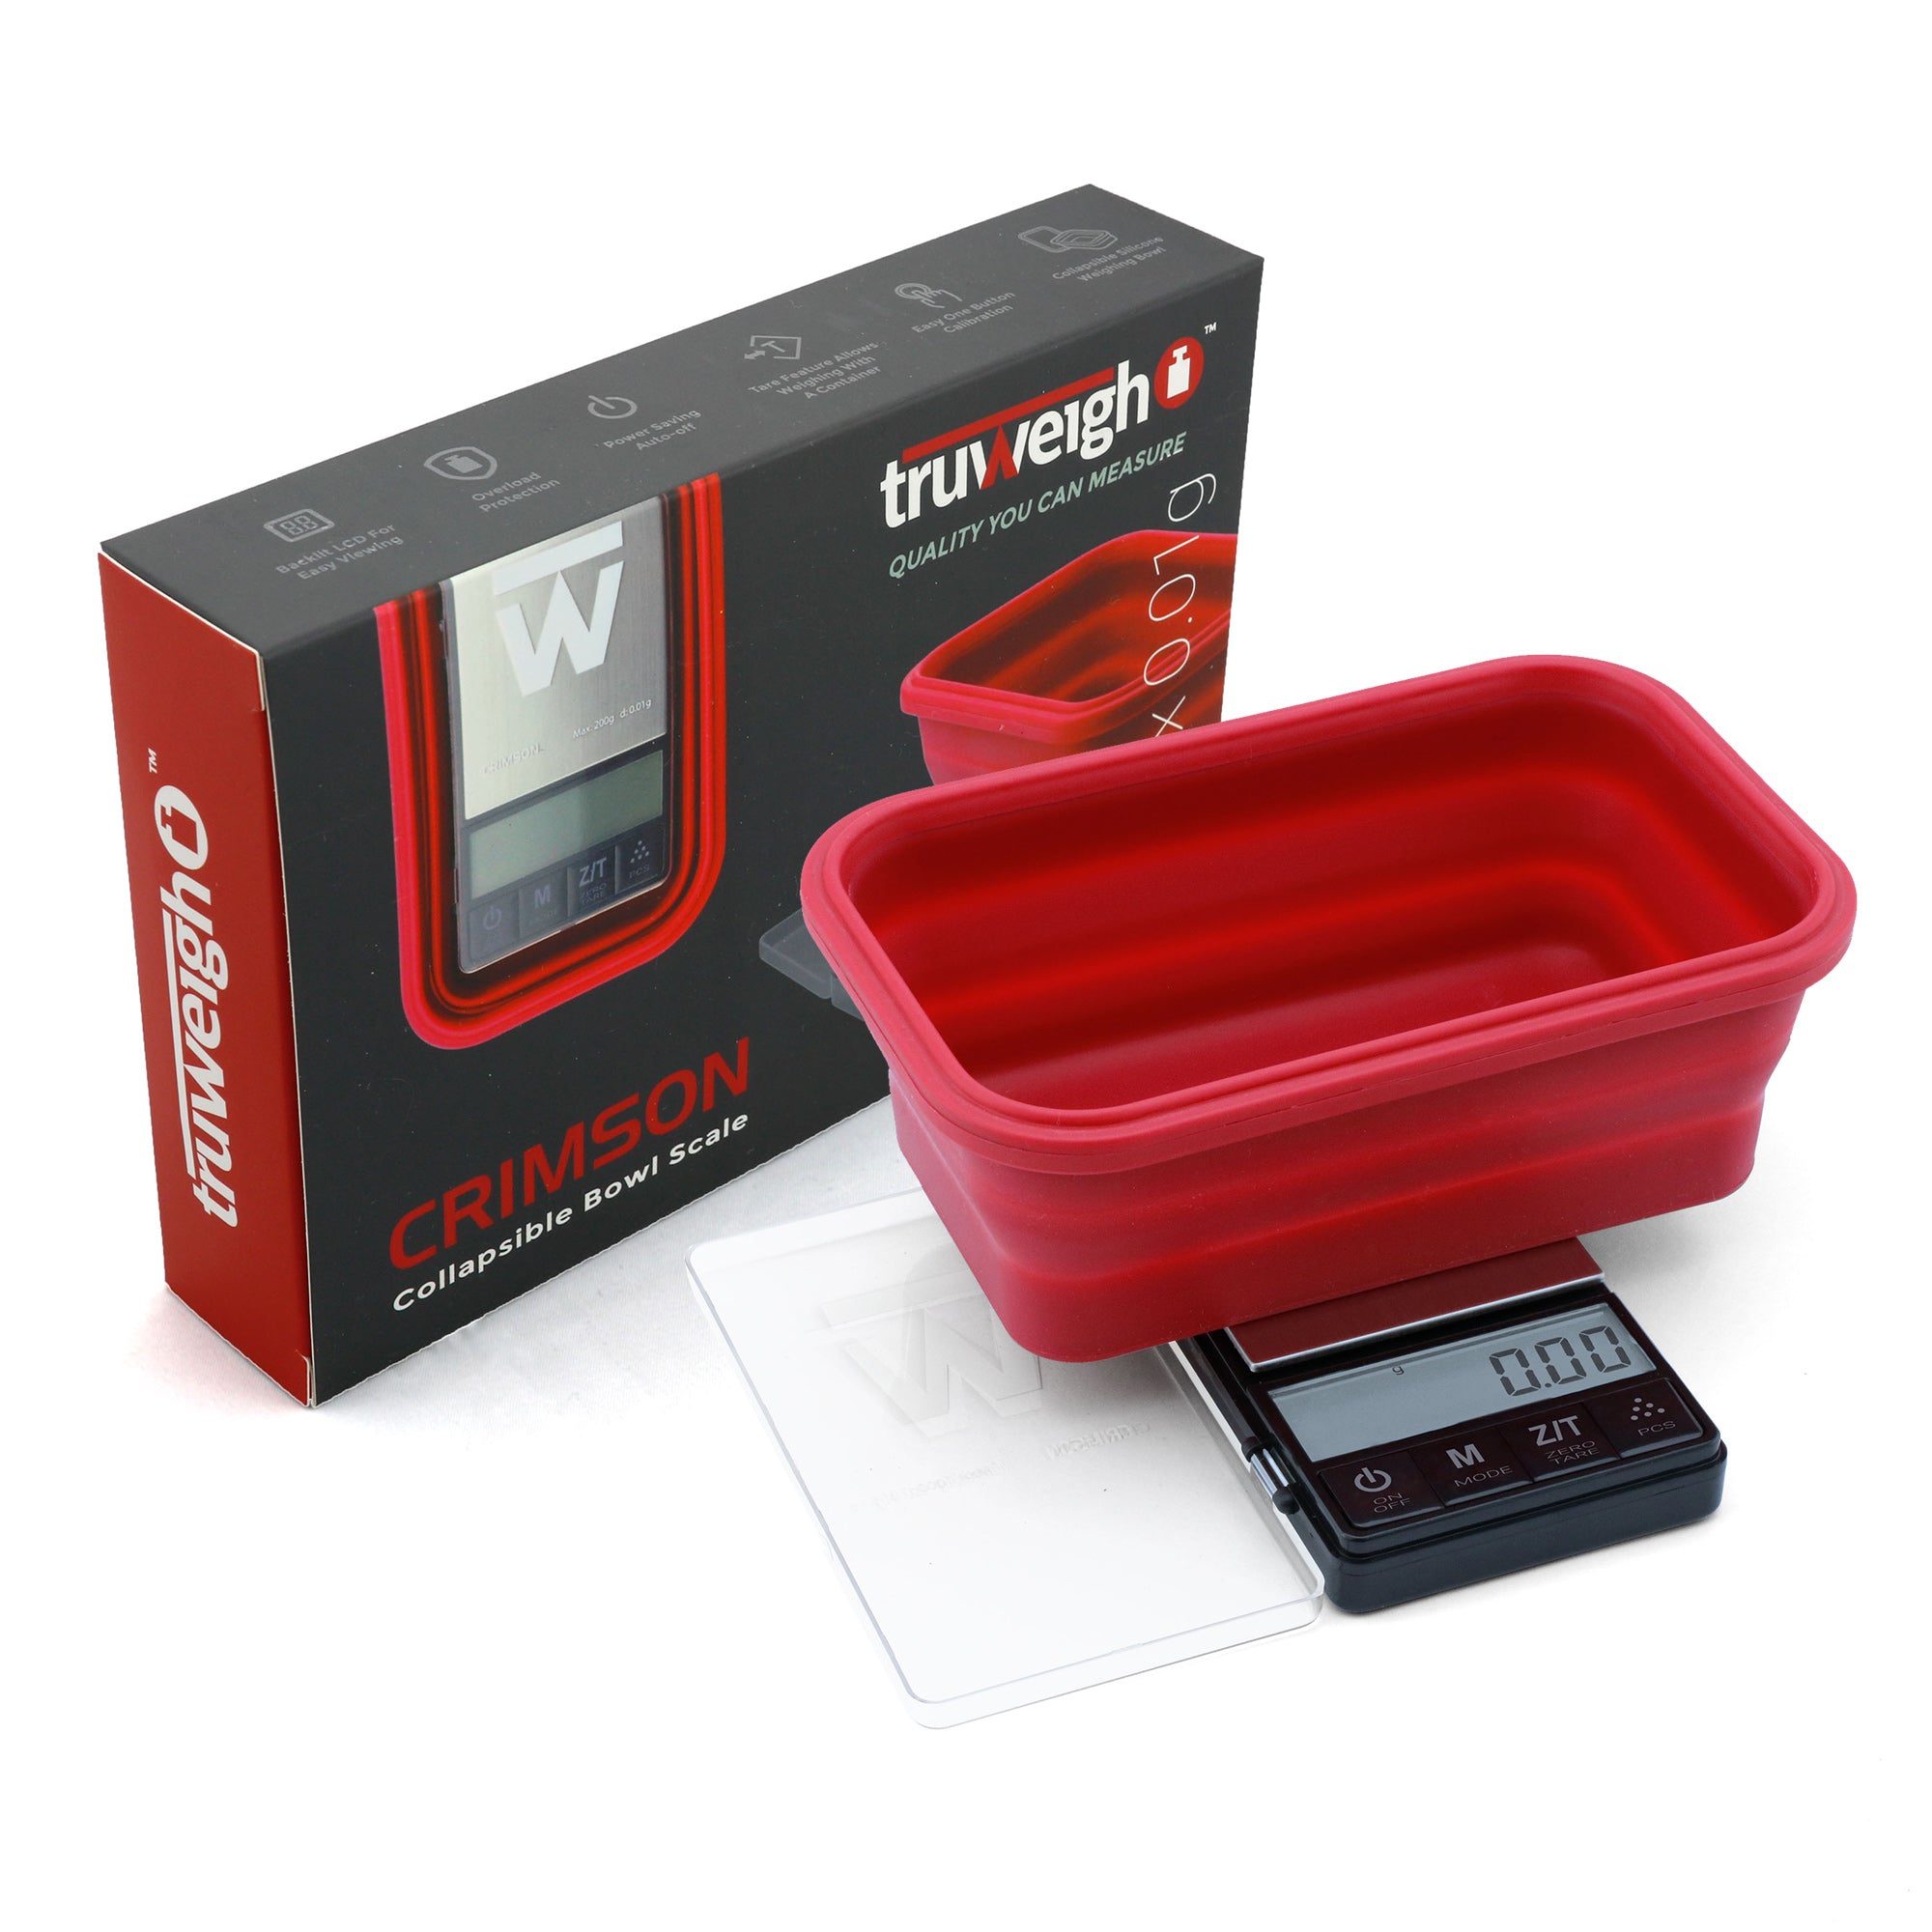 Trap1200g Digital Pocket Scale with Bowl